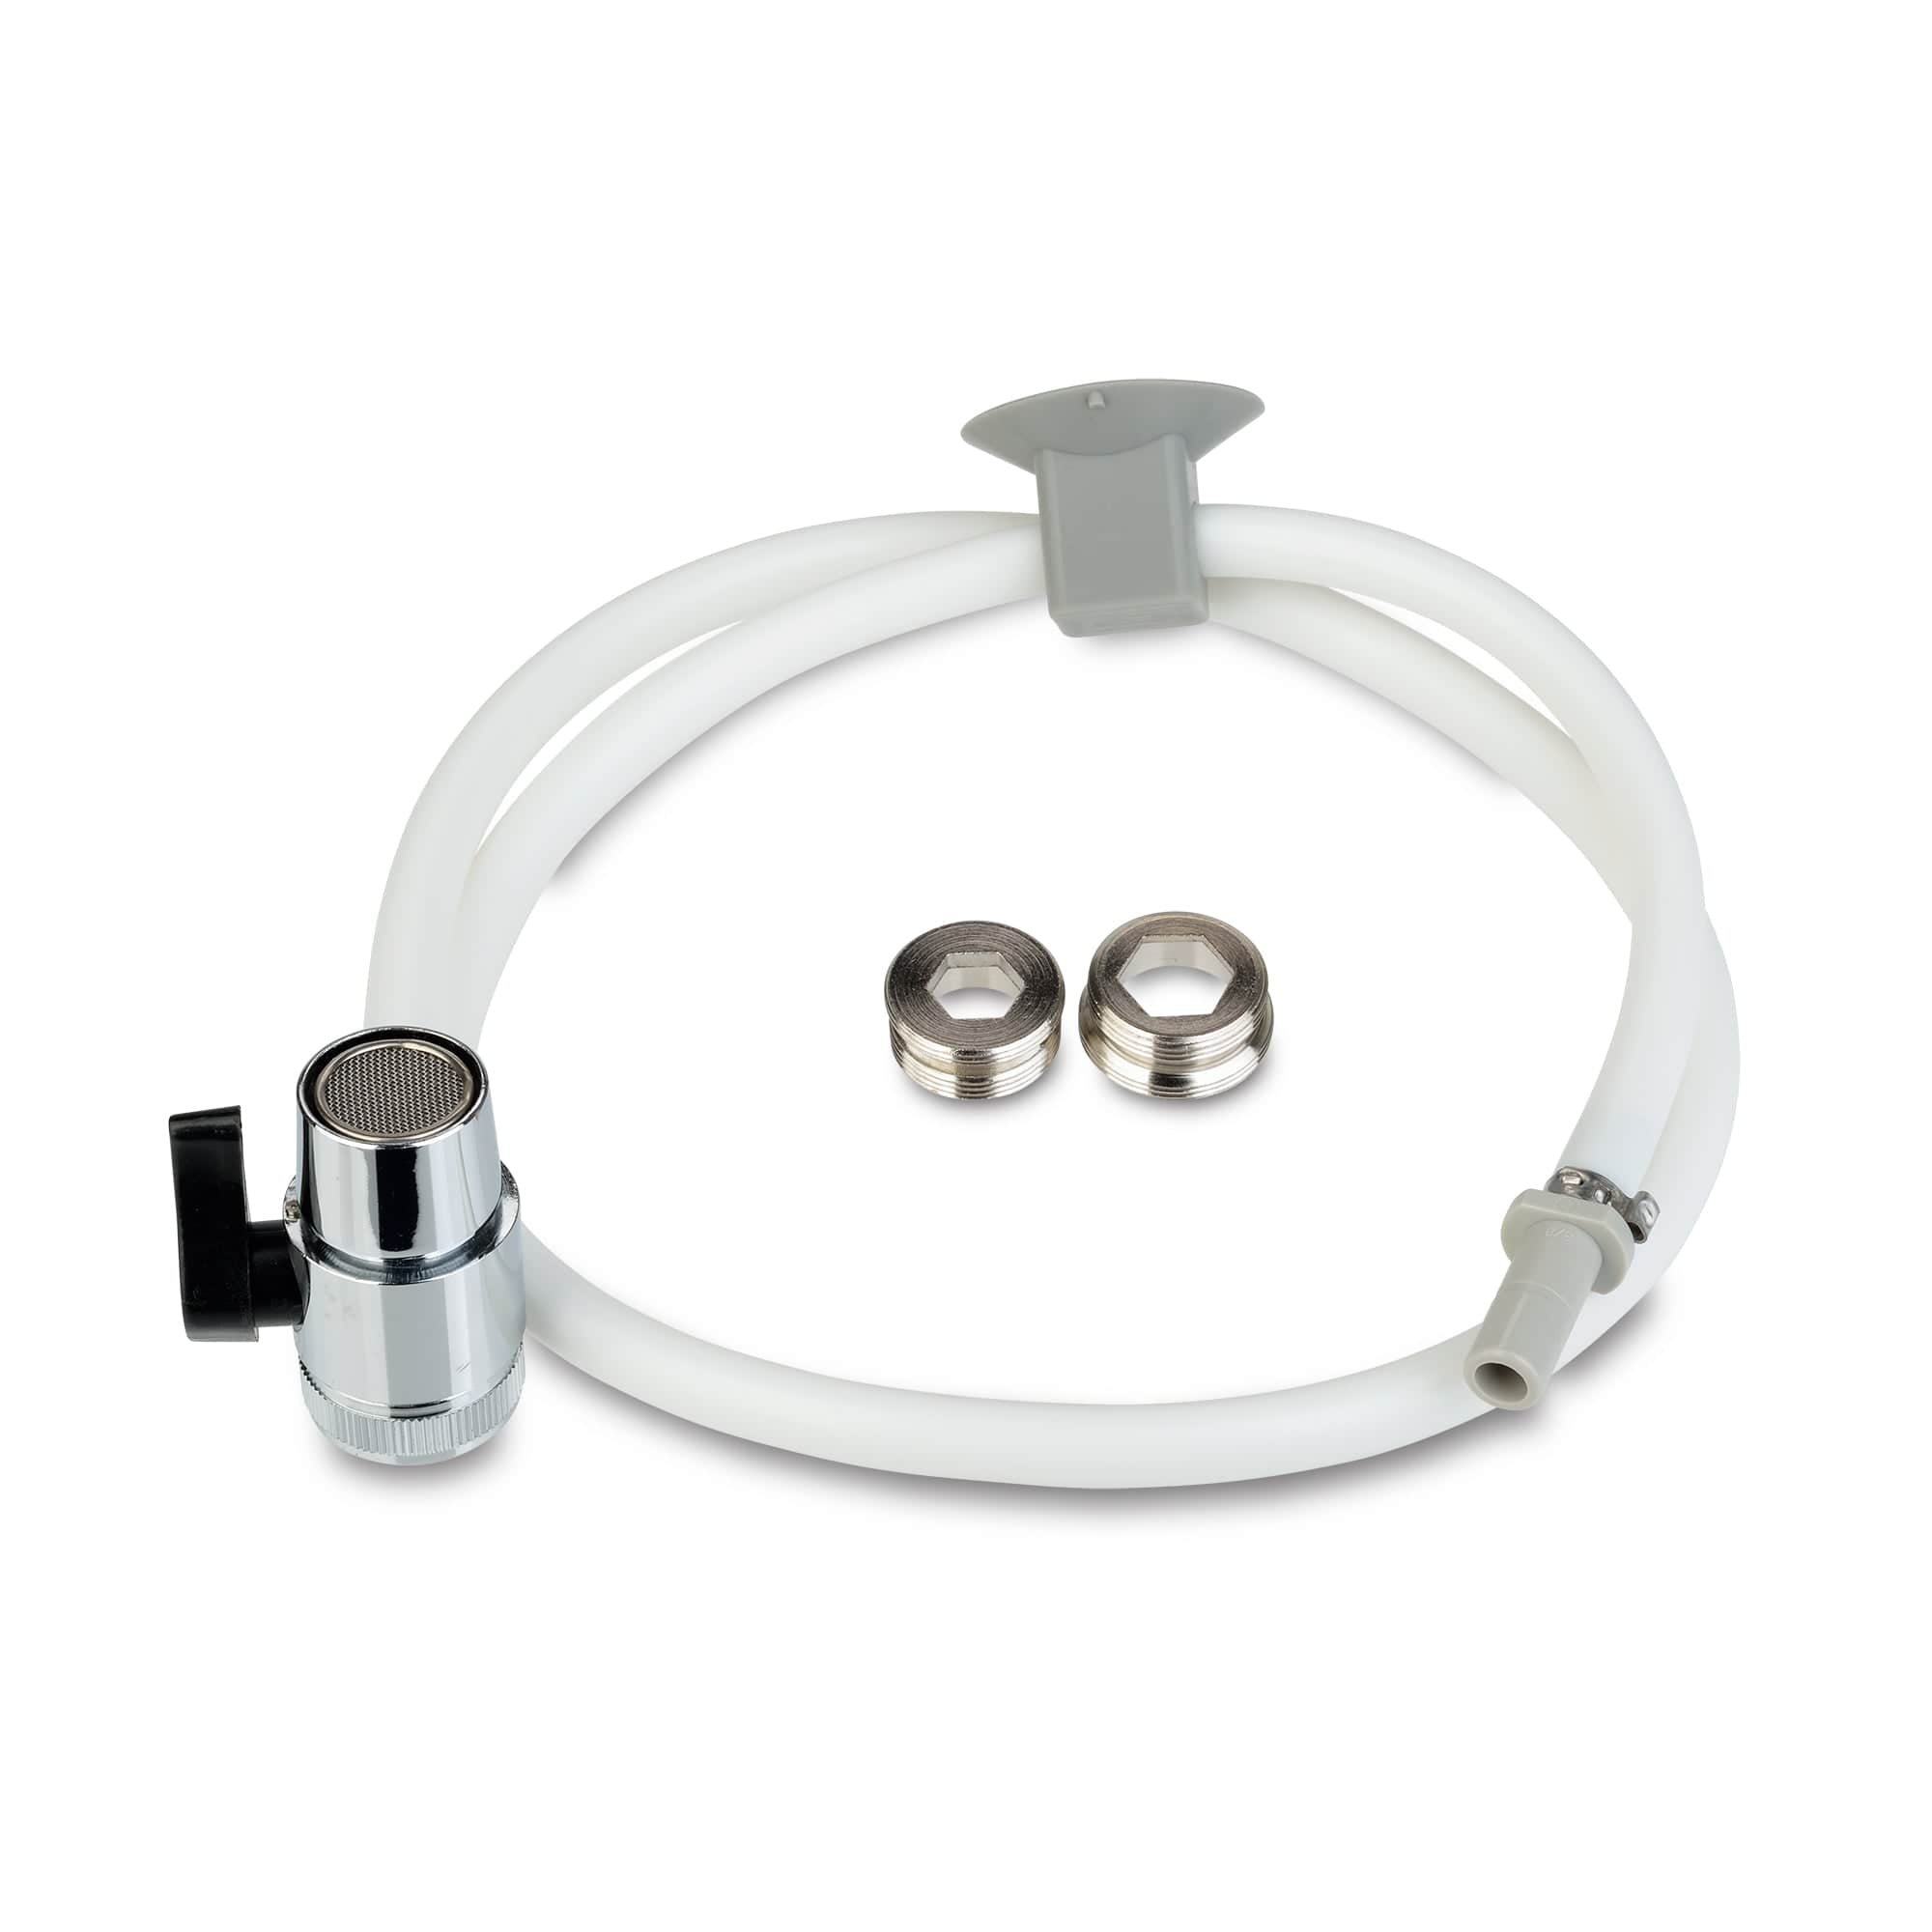 H2O+ Pearl Countertop Water Filter System H625 - Molaix - Molaix819911010639'H2O+ COUNTERTOP SYSTEMSH625